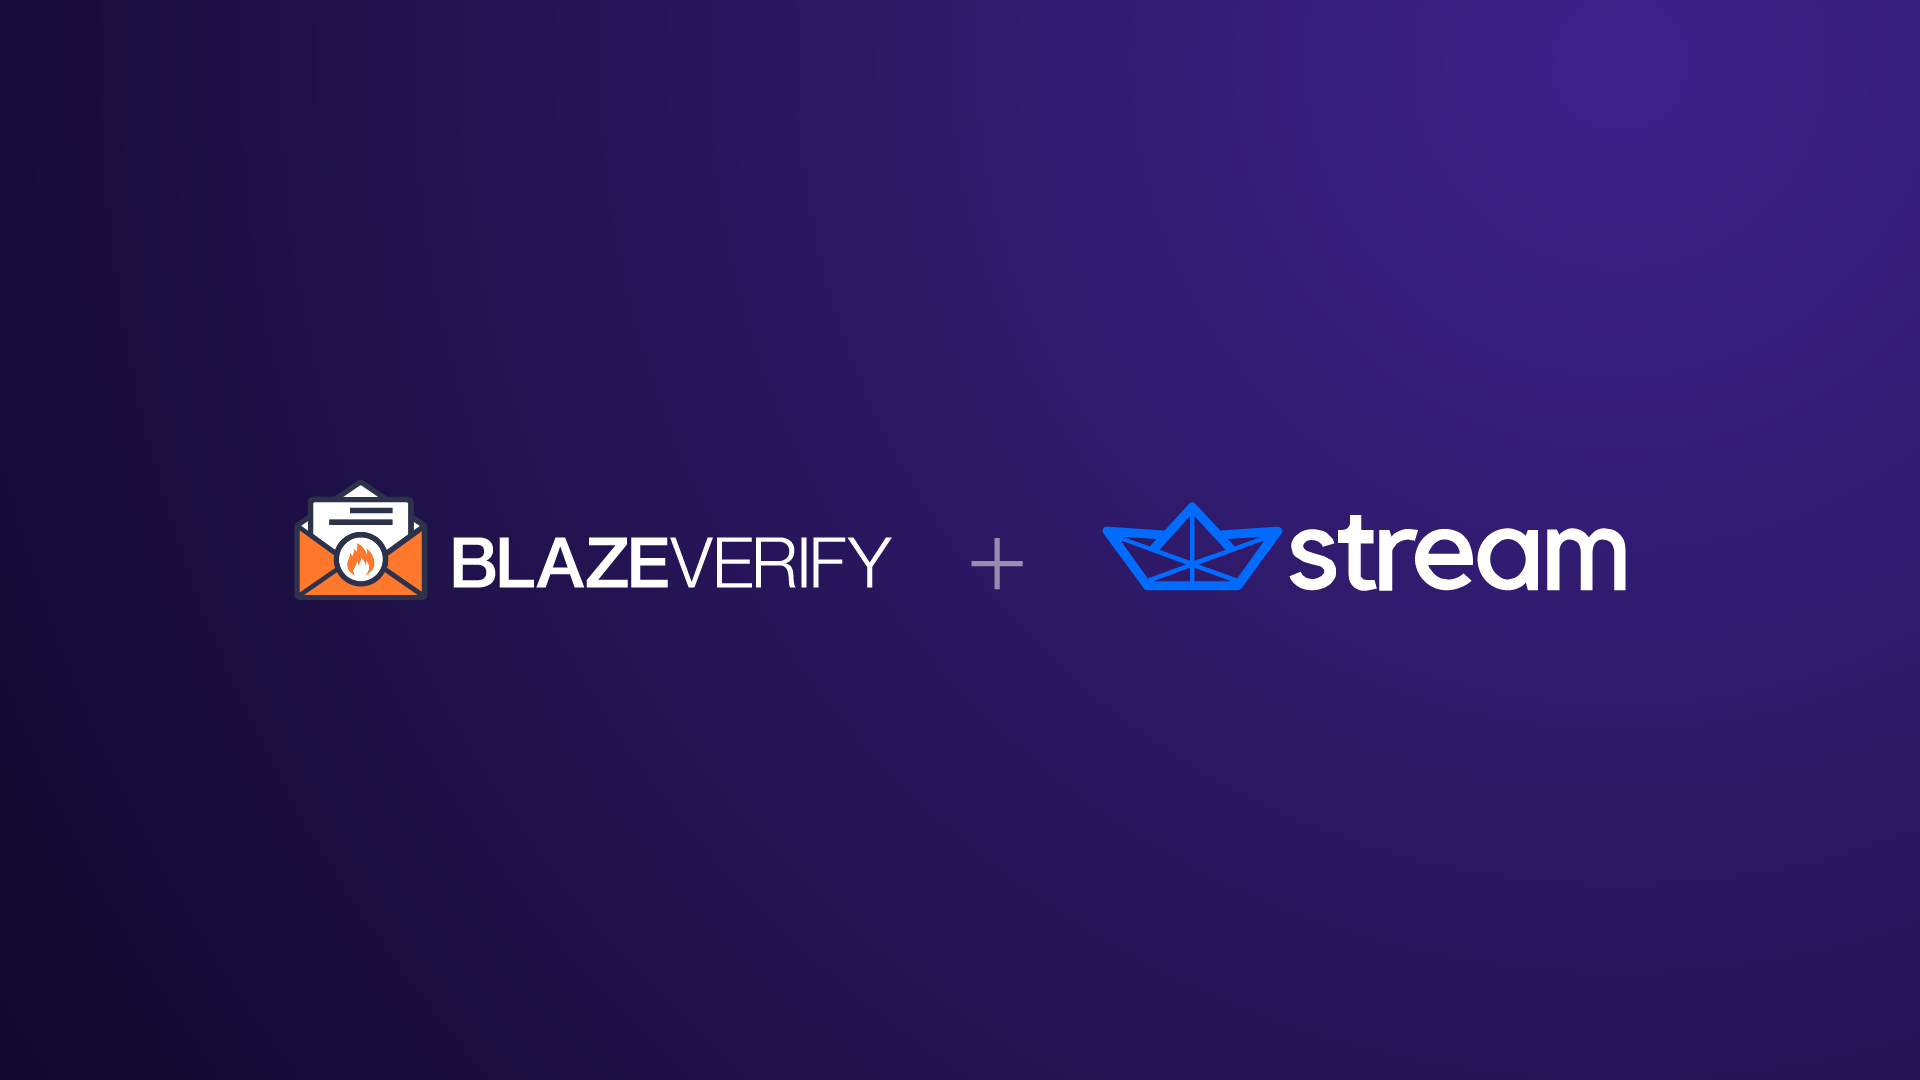 Blaze Verify Partners With Stream to Improve Email Deliverability and ROI